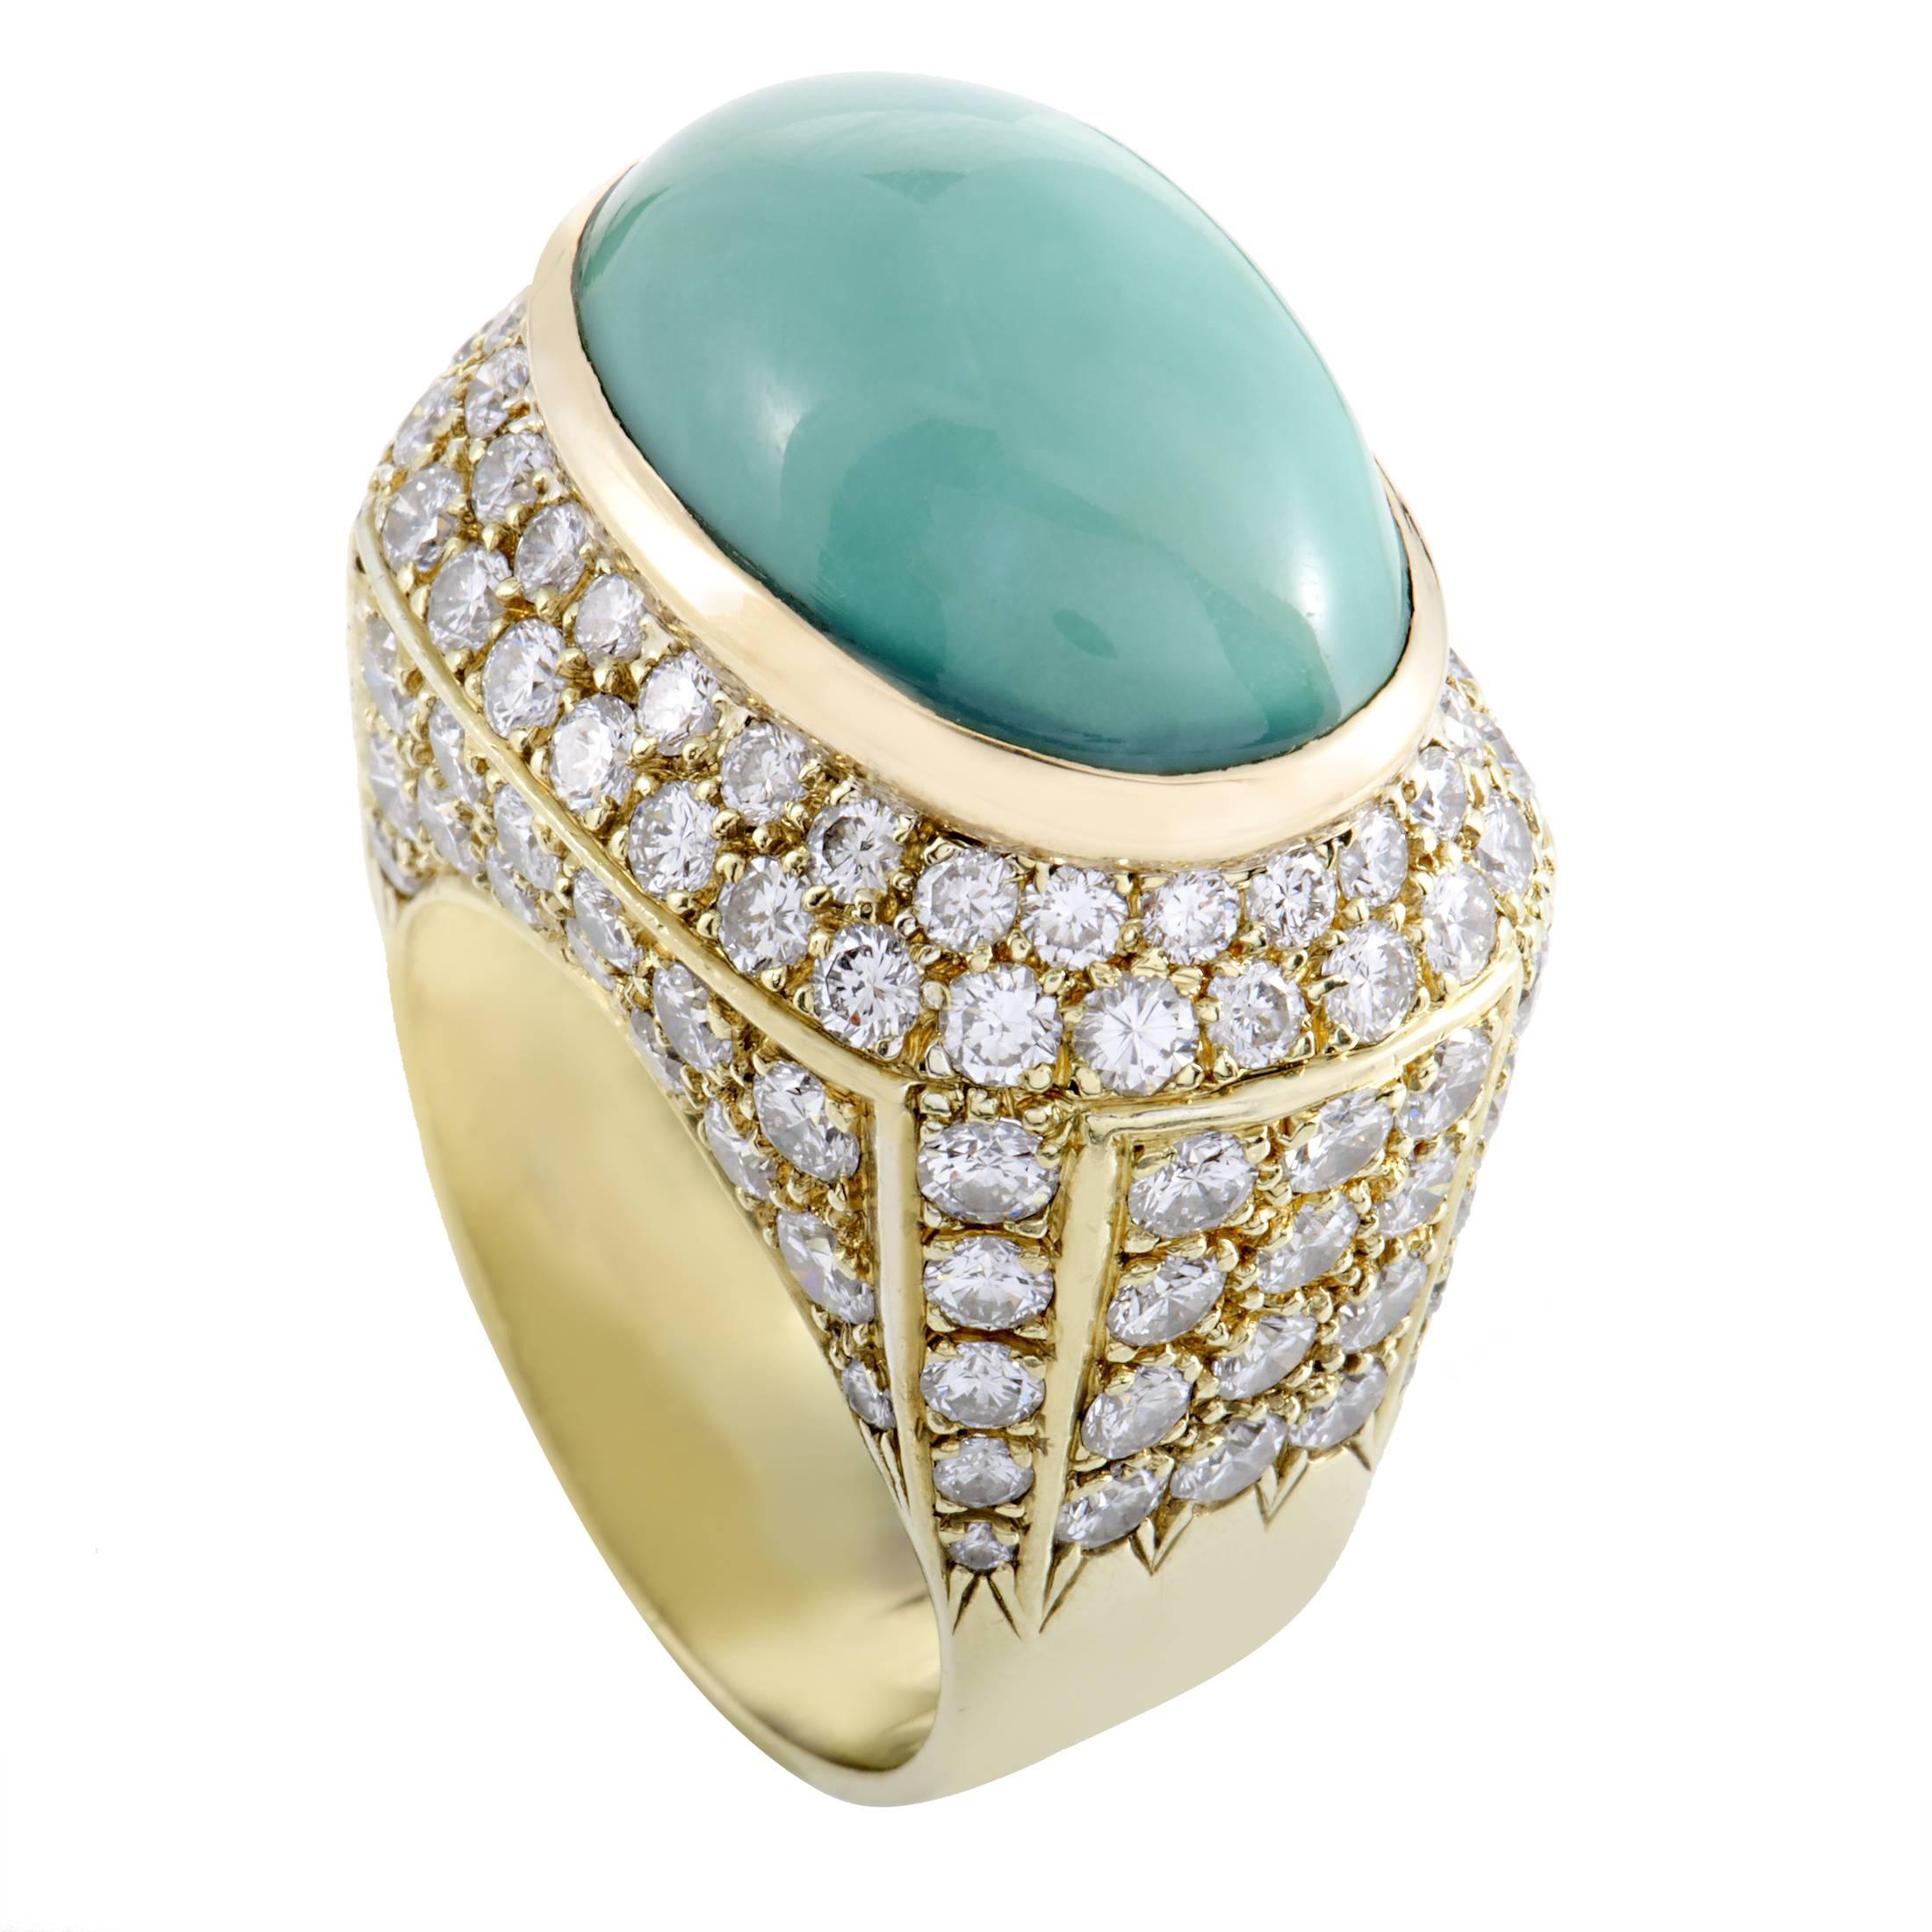  Turquoise Cabochon Diamond Pave  Yellow Gold Cocktail Ring